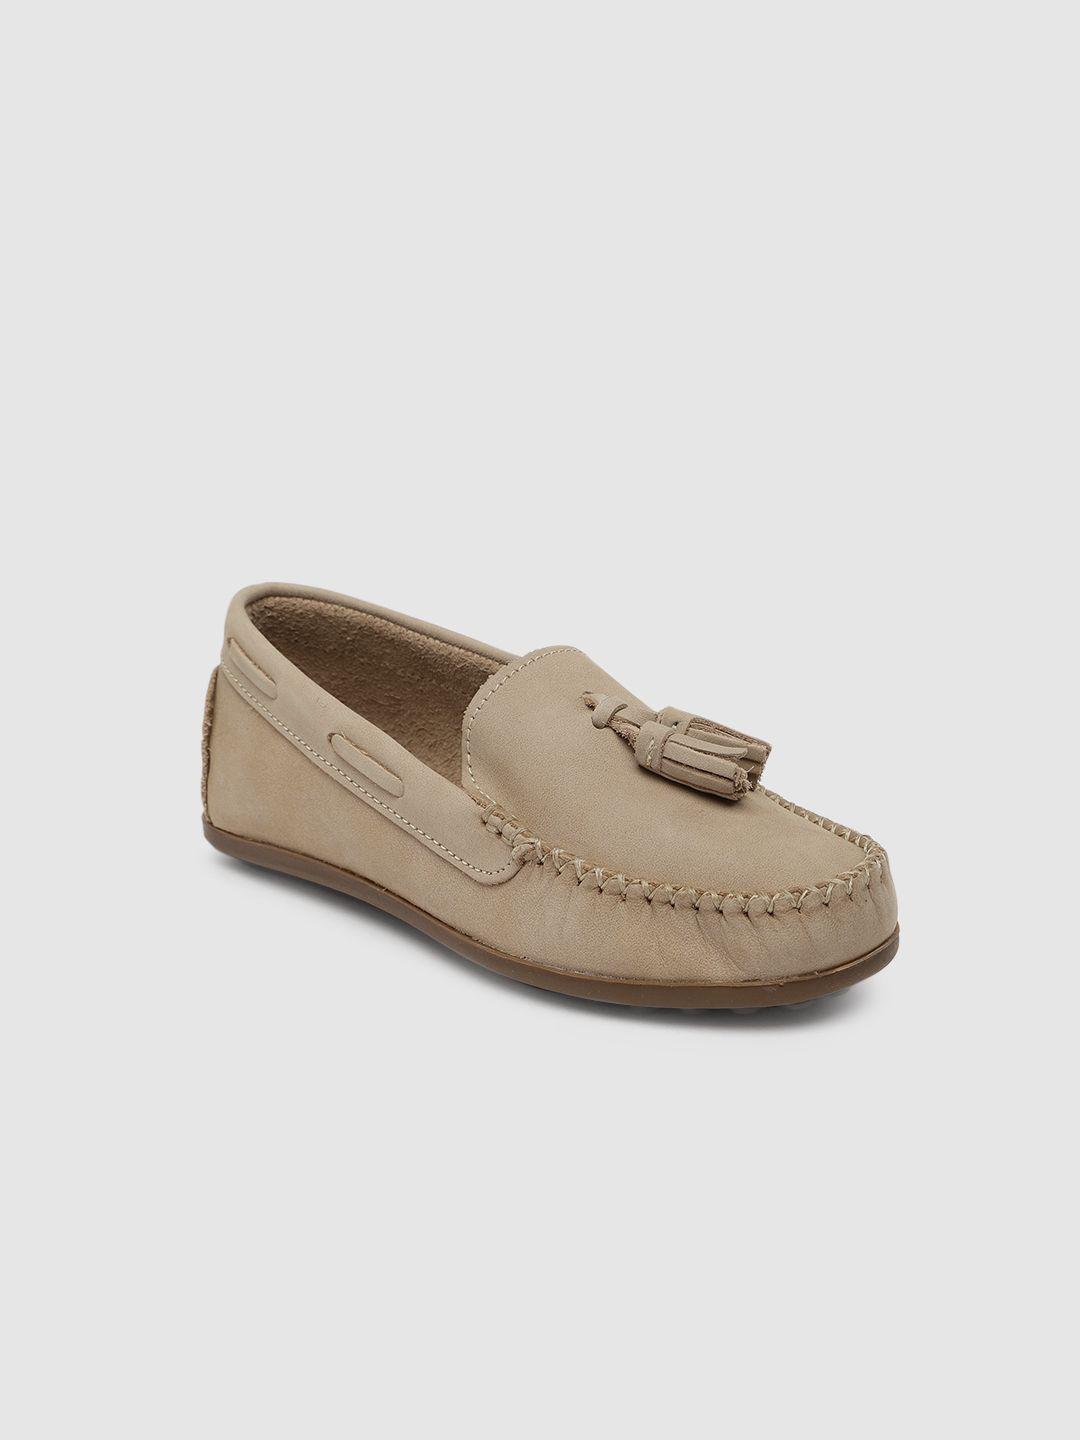 metro kids company girls camel brown solid leather loafers